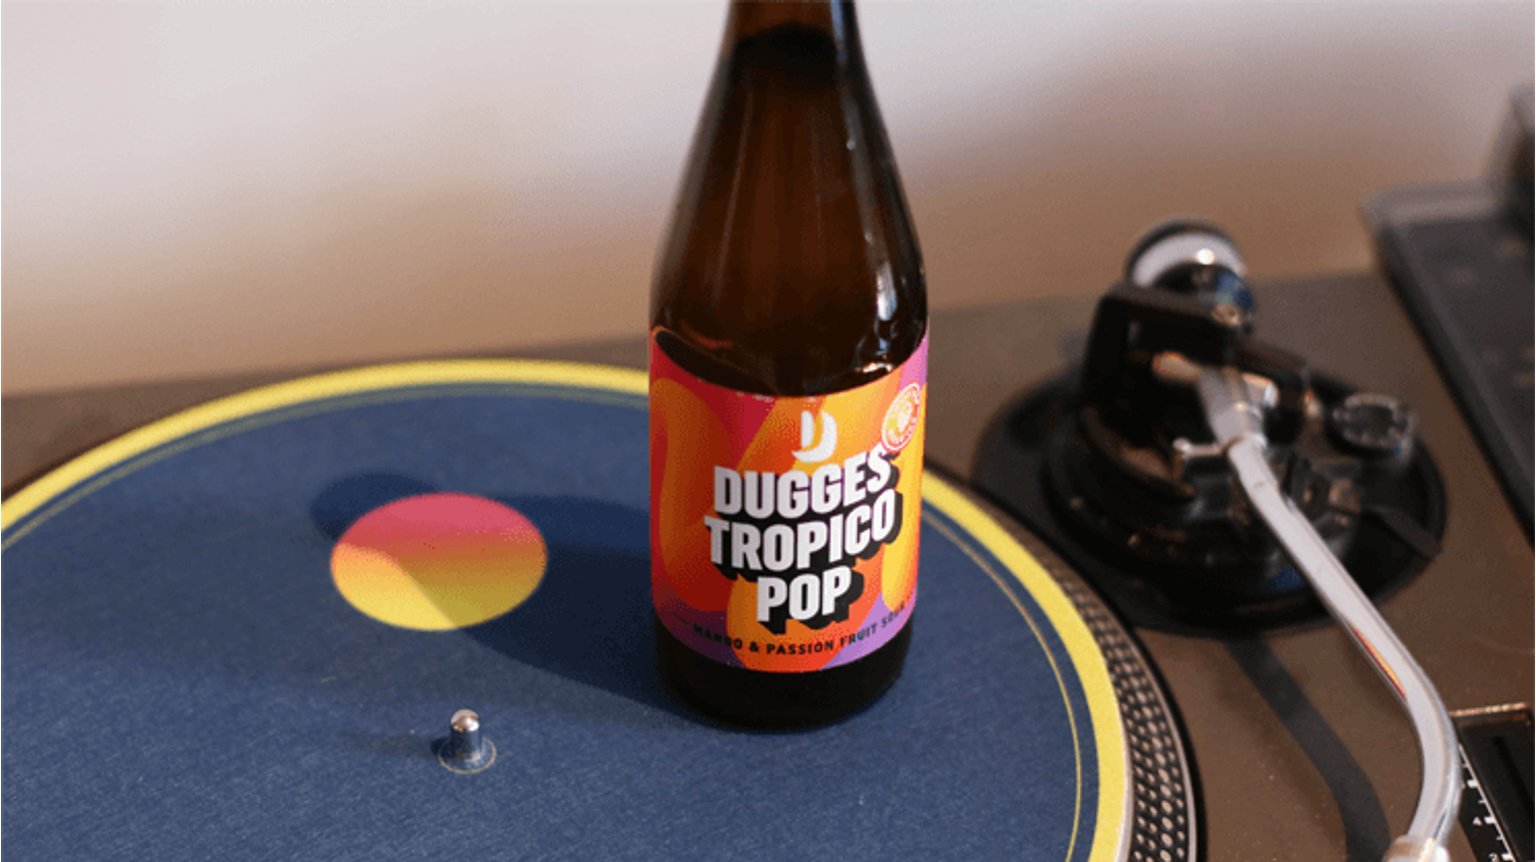 thumbnail for blog article named: Beery Christmas Jour 19 : Dugges – Tropico Pop